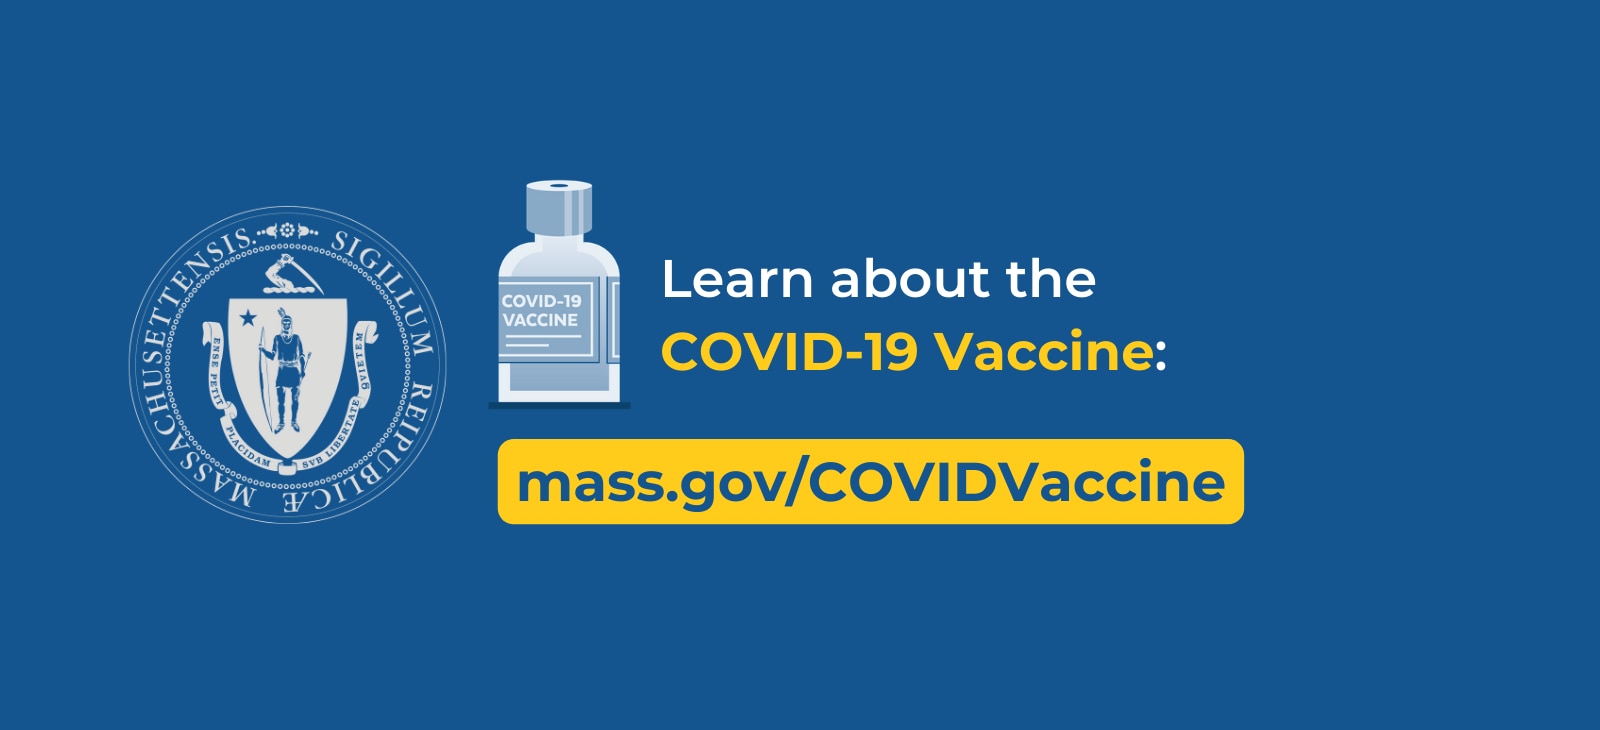 Baker-Polito Administration Announces Initial Steps for COVID-19 Vaccine Distribution